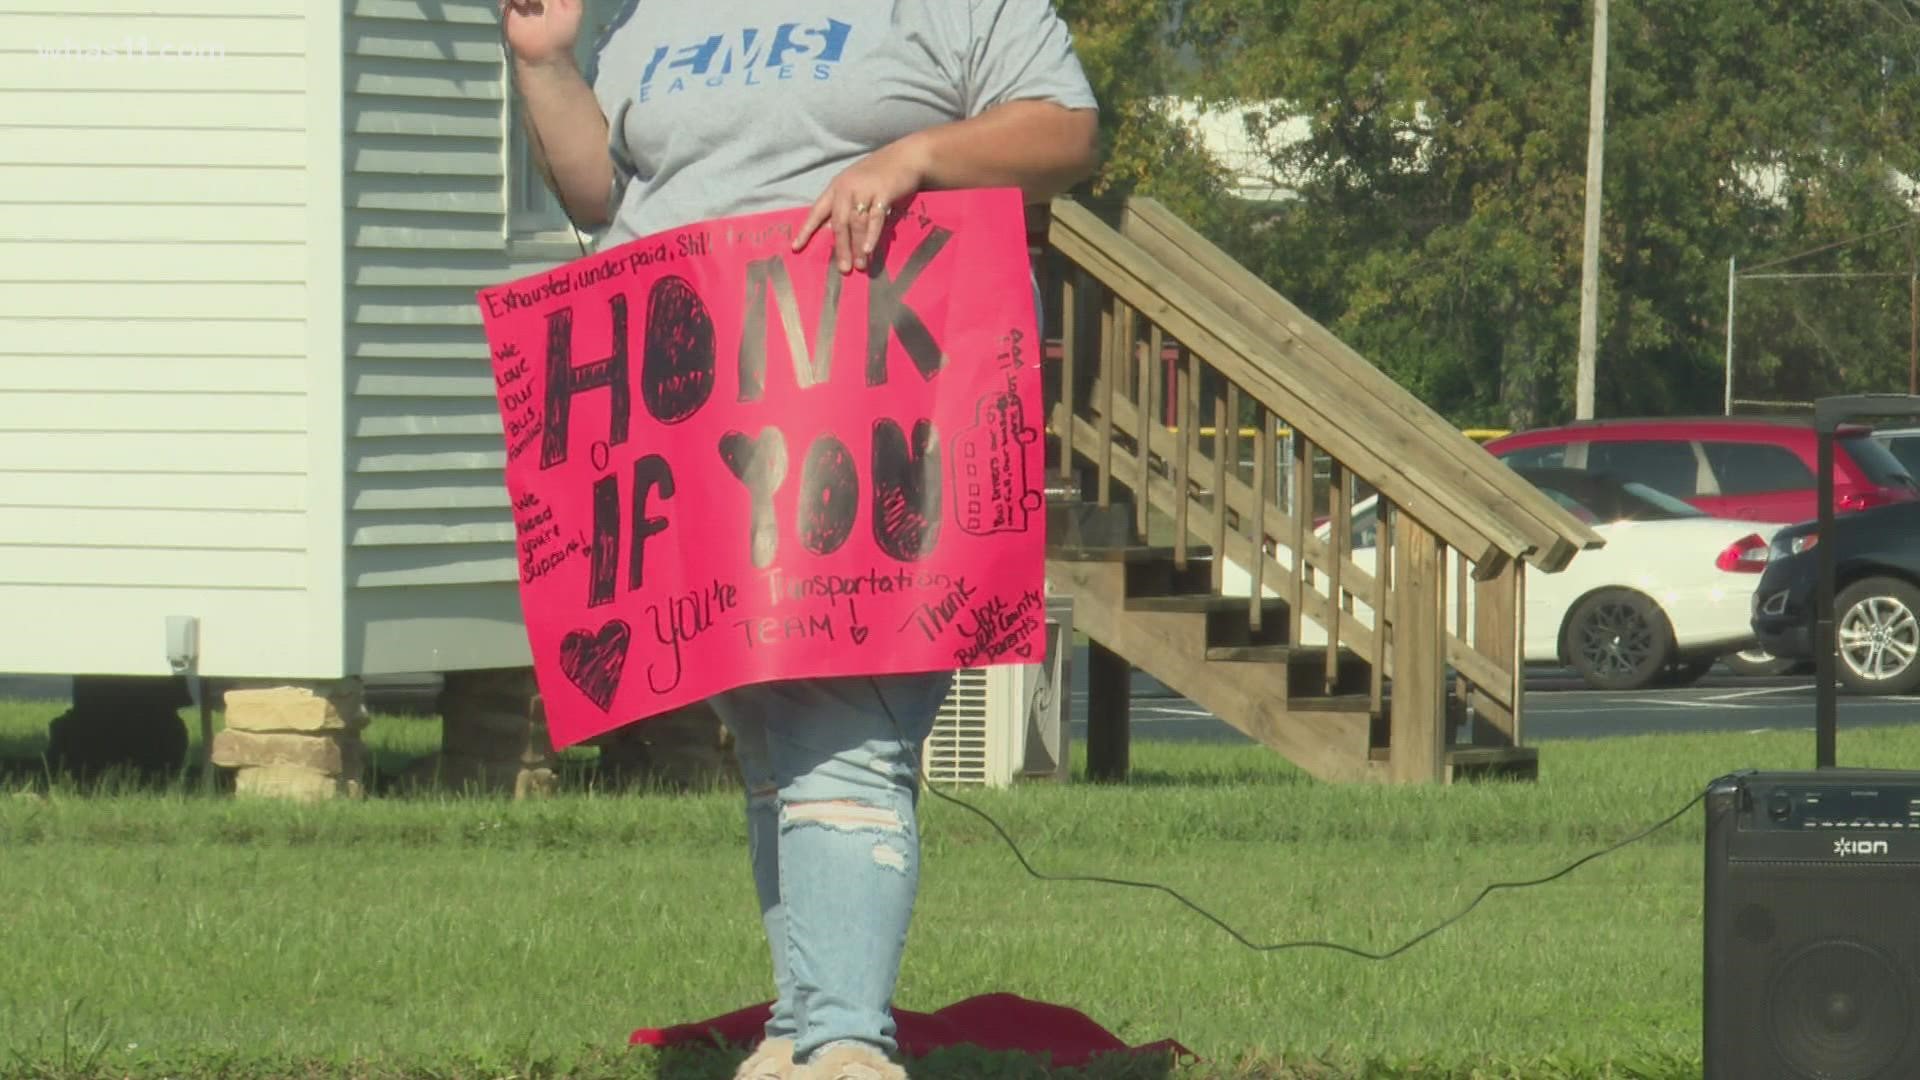 Wednesday morning, some bus drivers protested, asking the Bullitt County School Board to give them what they believe they deserve.